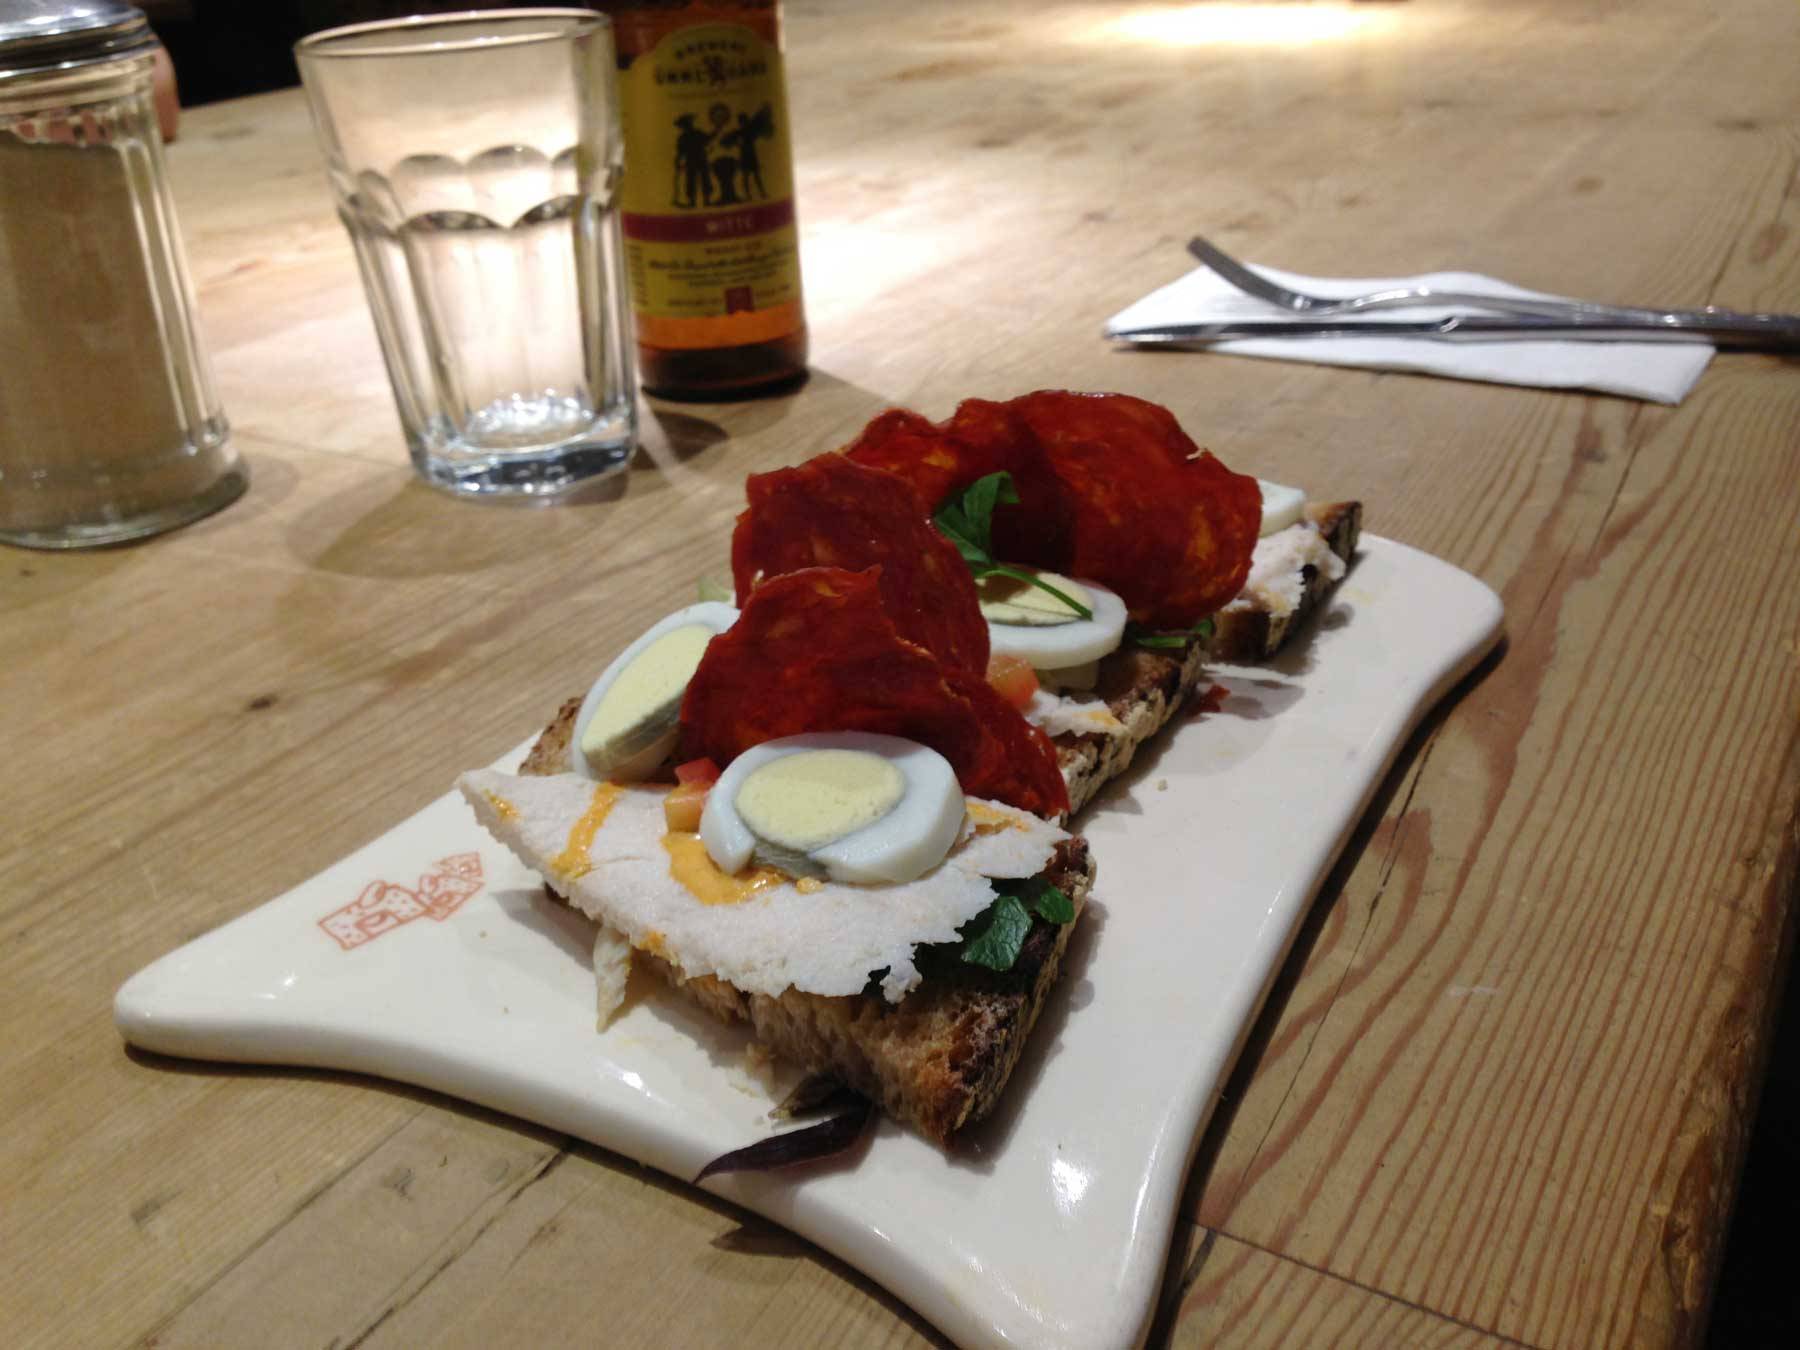 An open faced sandwich with slices of chicken and egg